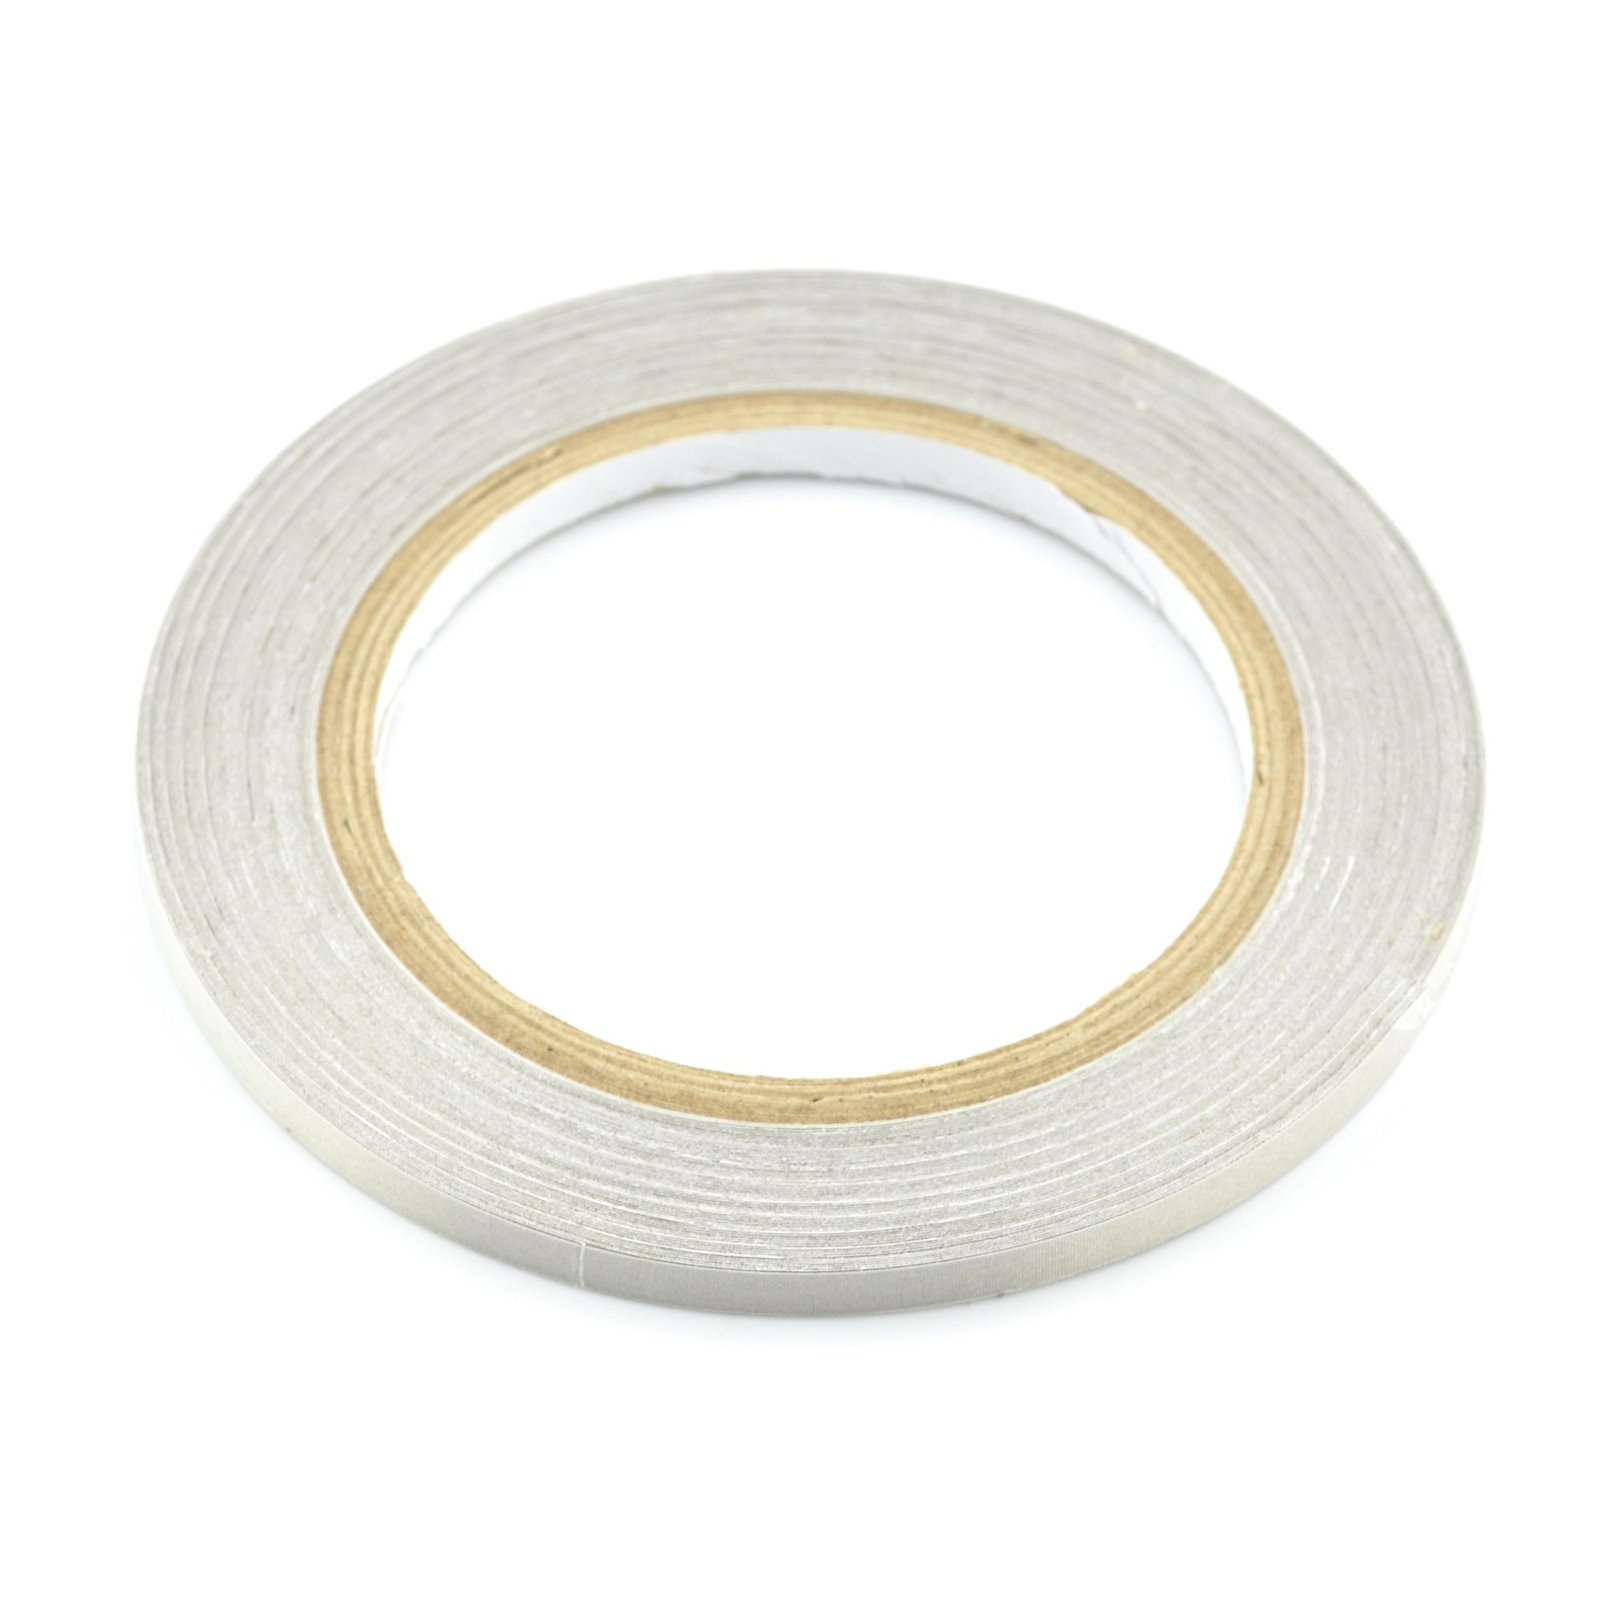 5mm x 30m High Temperature Tape for Replace Electrical & Printed Circuit Board 